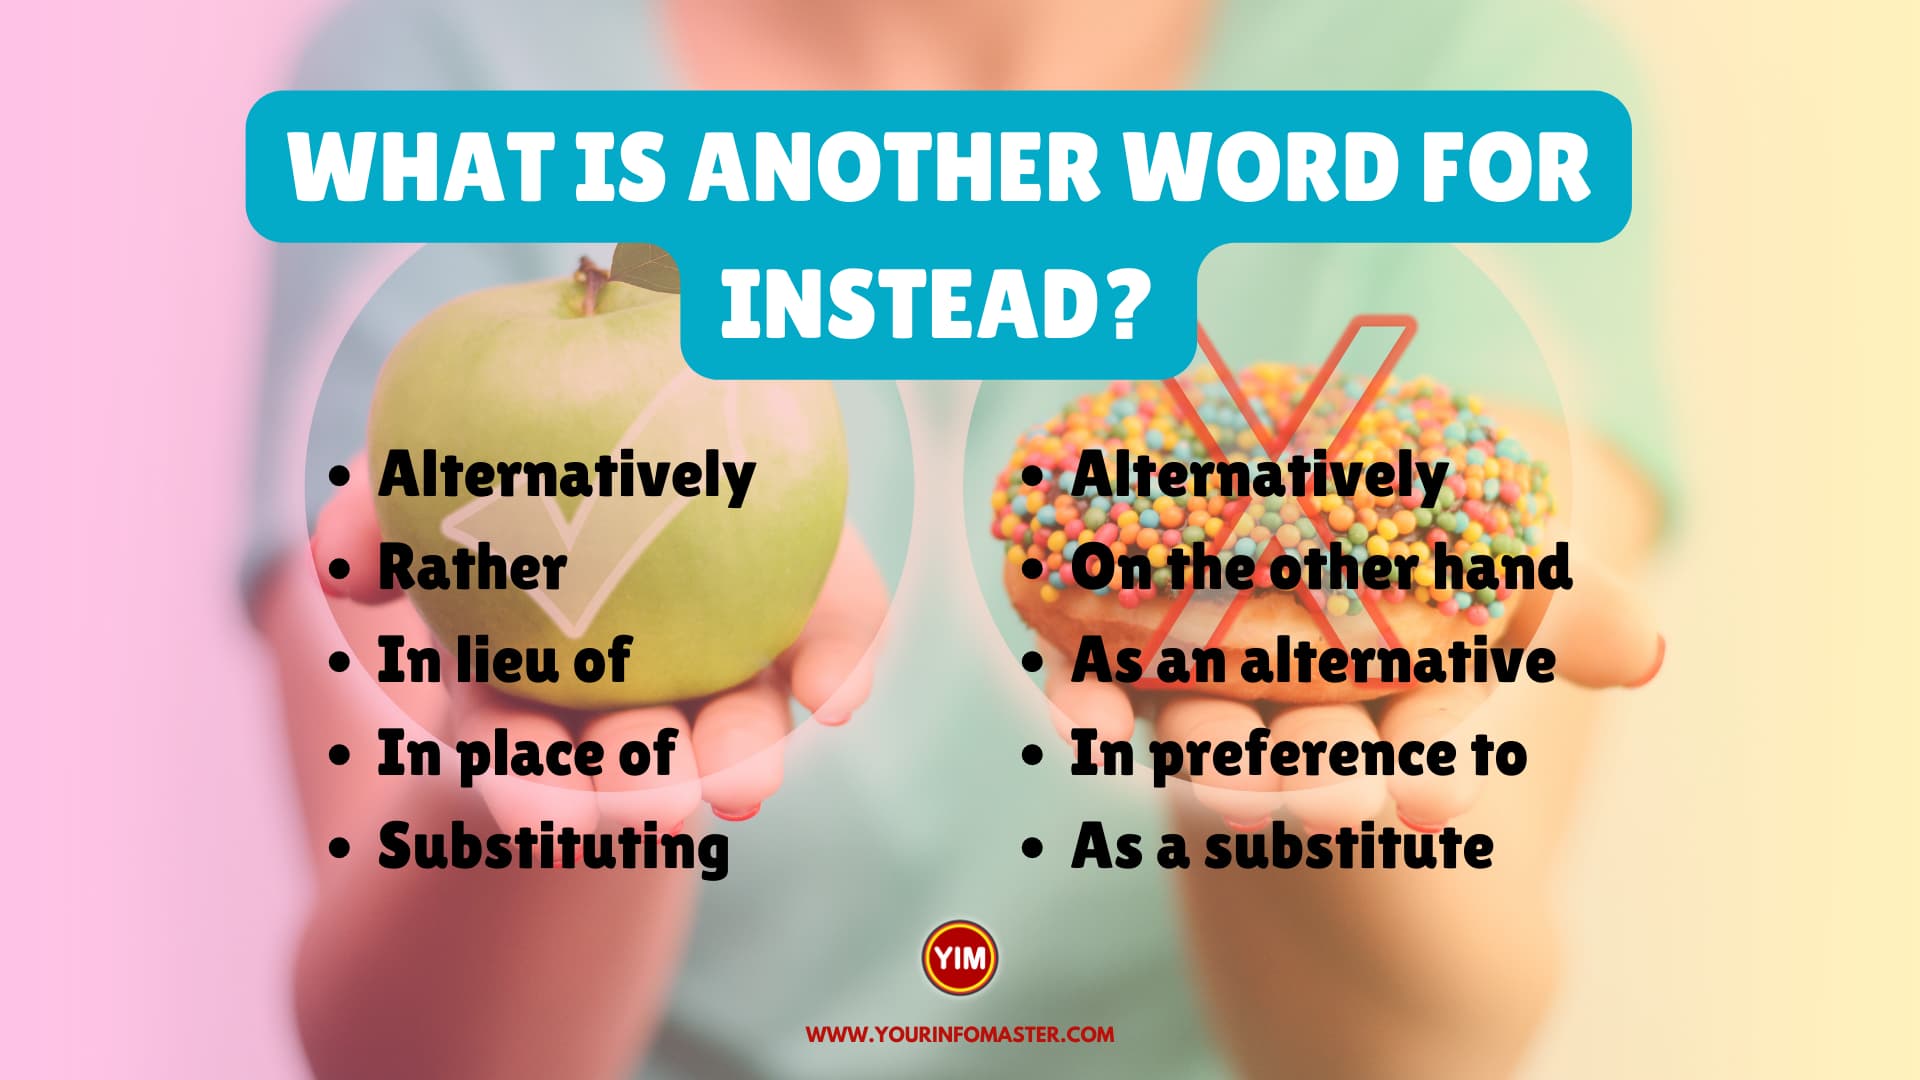 What is another word for Instead